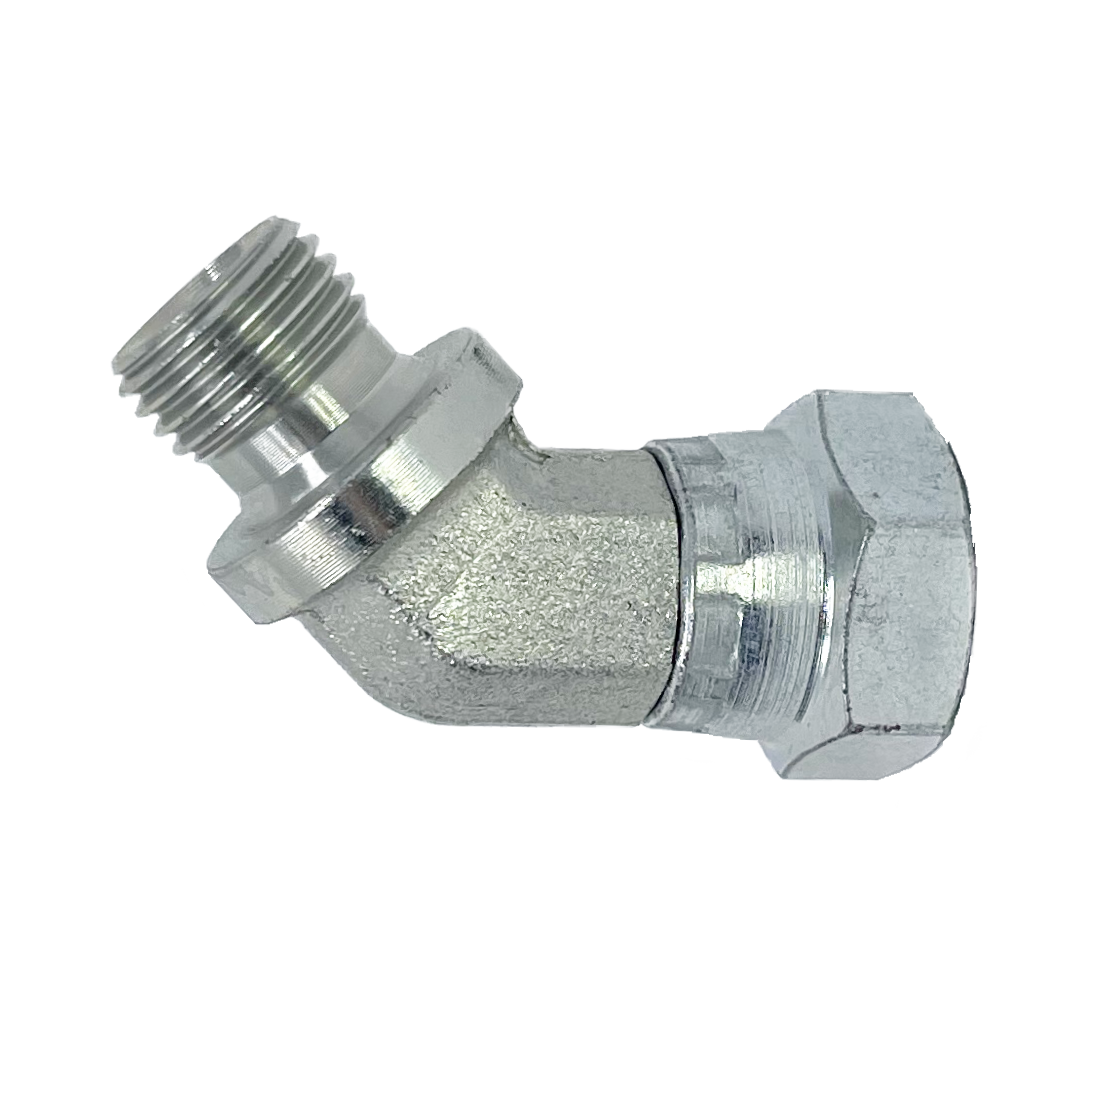 9048-06-06 : Adaptall 45-Degree Adapter, Male 0.375 (3/8") BSPP x Female 0.375 (3/8") BSPP, Carbon Steel